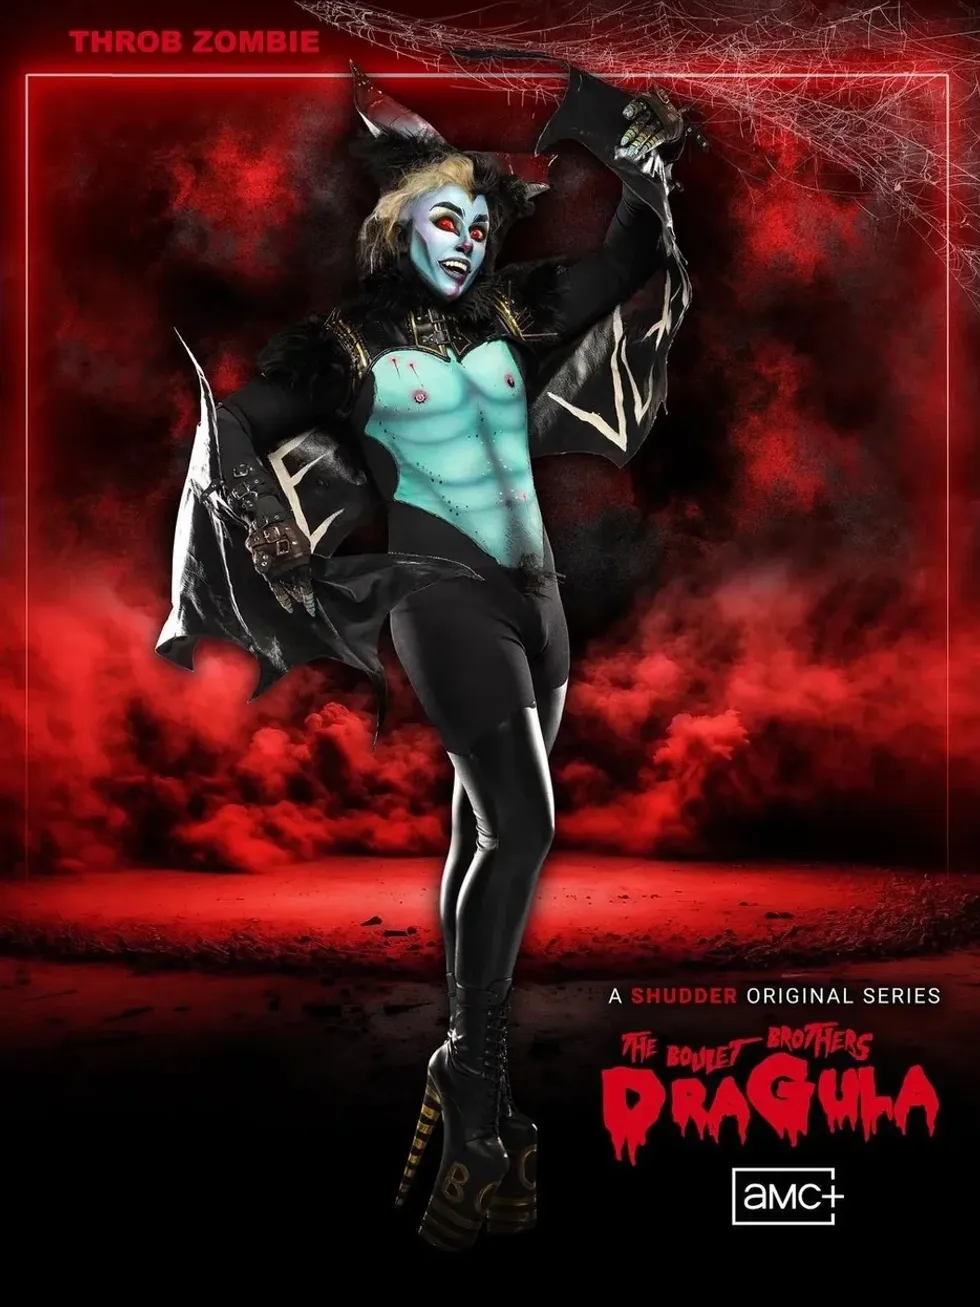 Drag king Throb Zombie competed on Dragula